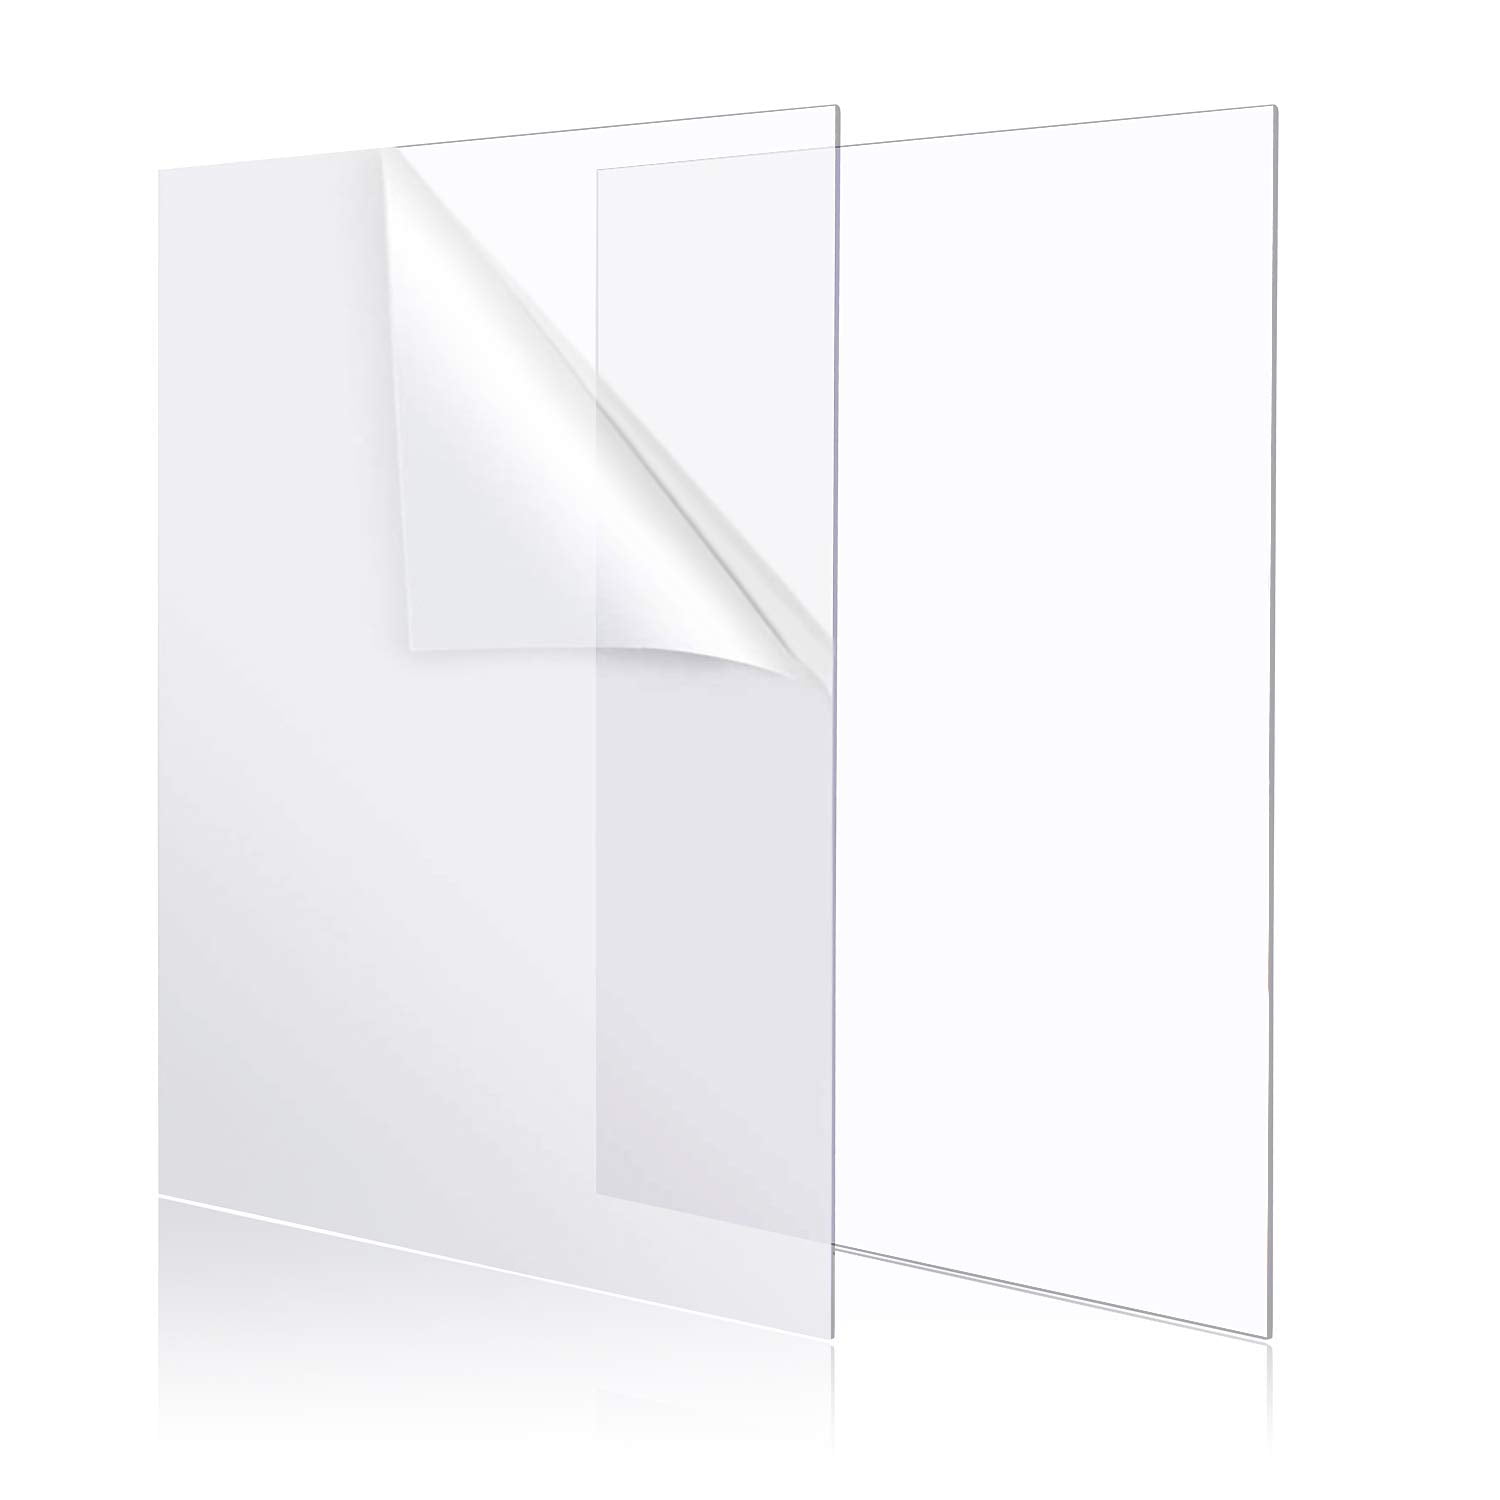  0.02 Thin Rigid Acrylic Sheet for Picture Frame, 5 Pack 8 x  10 Clear Plastic Sheets Shatter Resistant Clear Plastic Sheet for DIY  Crafts Document Picture Frames Paitings : Industrial 